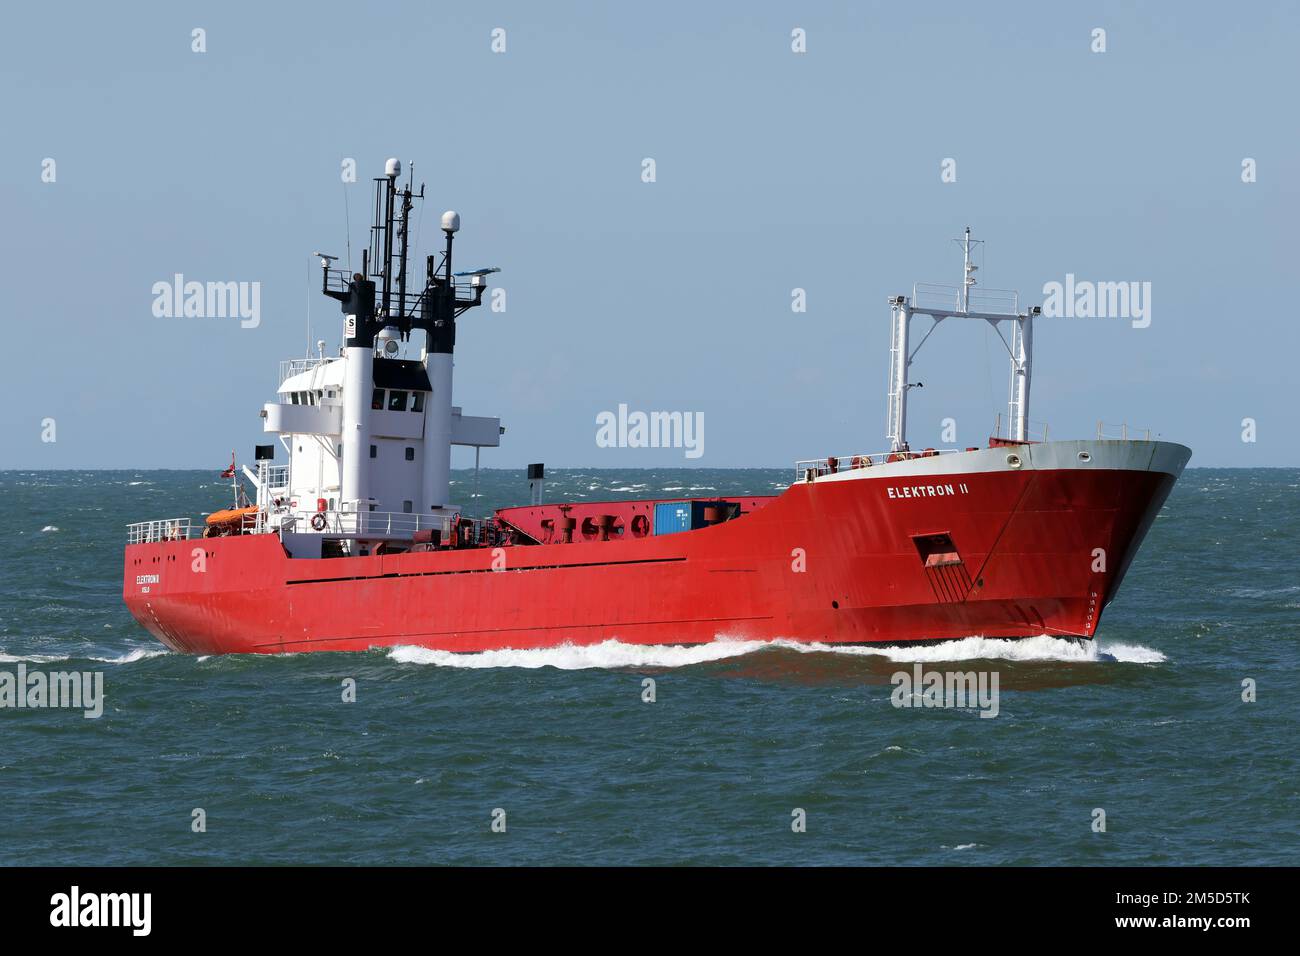 The ro-ro cargo ship Elektron II arrives at the port of Rotterdam on August 31, 2022. Stock Photo